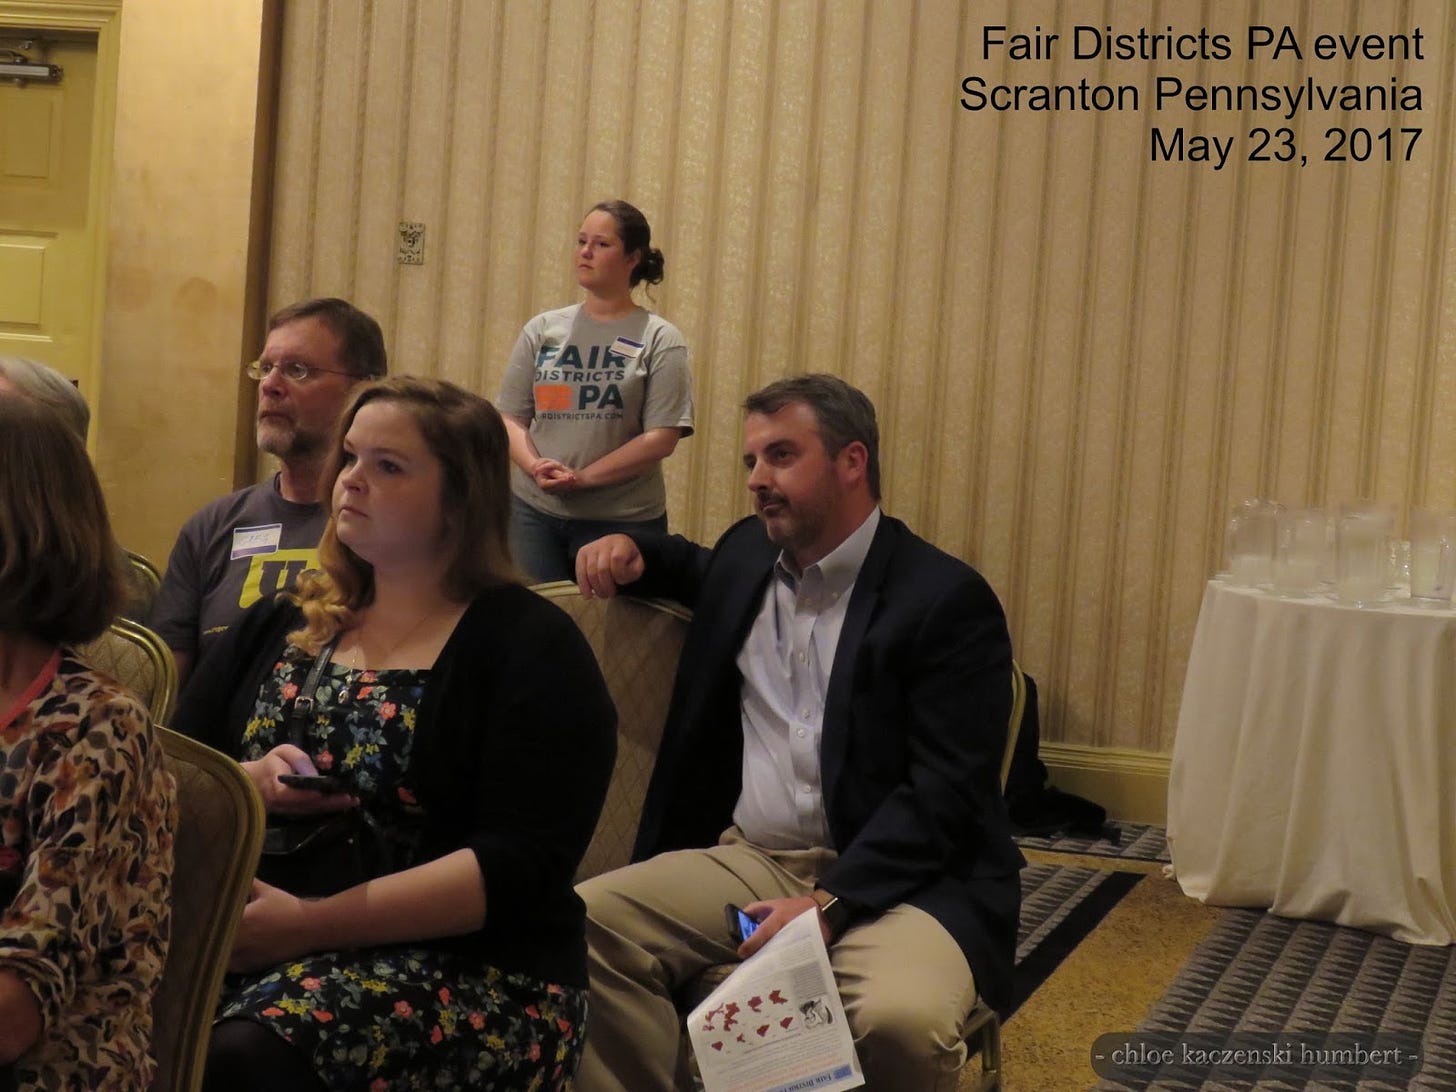 Kyle Donahue sitting in the back holding a pamphlet and cell phone listening to the speakers at a Fair Districts PA event at the Radisson Hotel in Scranton Pennsylvania. May 23, 2017. Photo by Chloe Kaczenski Humbert.